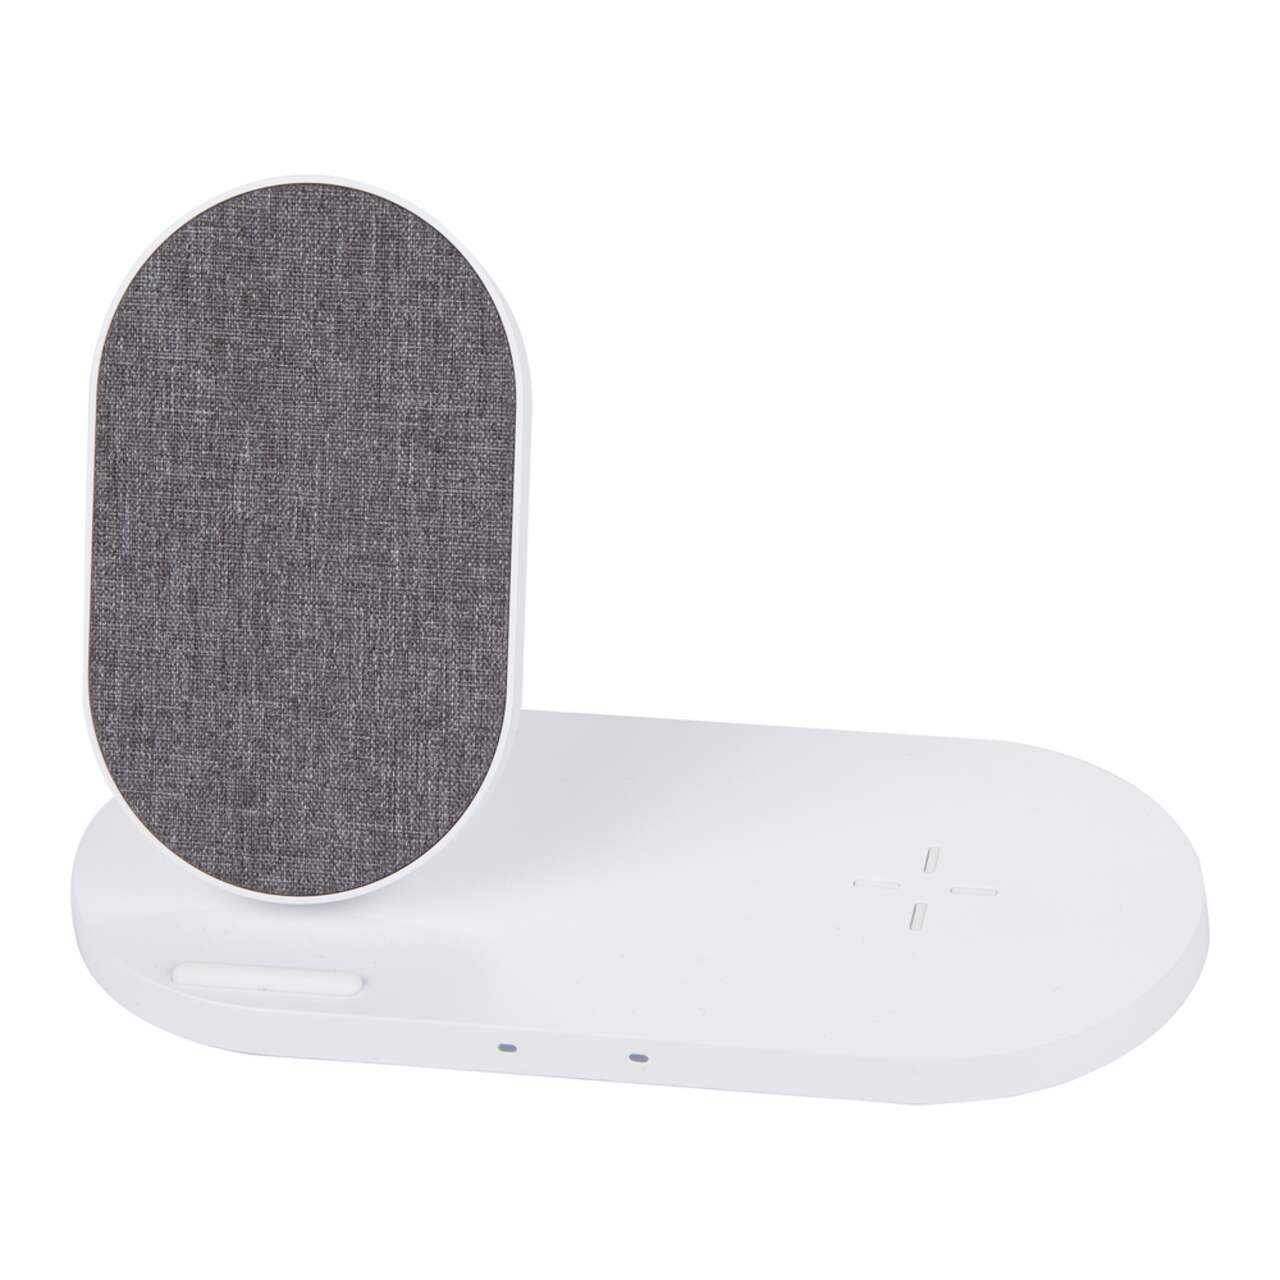 Bluehive 10W Fabric Wireless Charging Stand & Pad, Compatible with Most  Qi-Enabled Devices